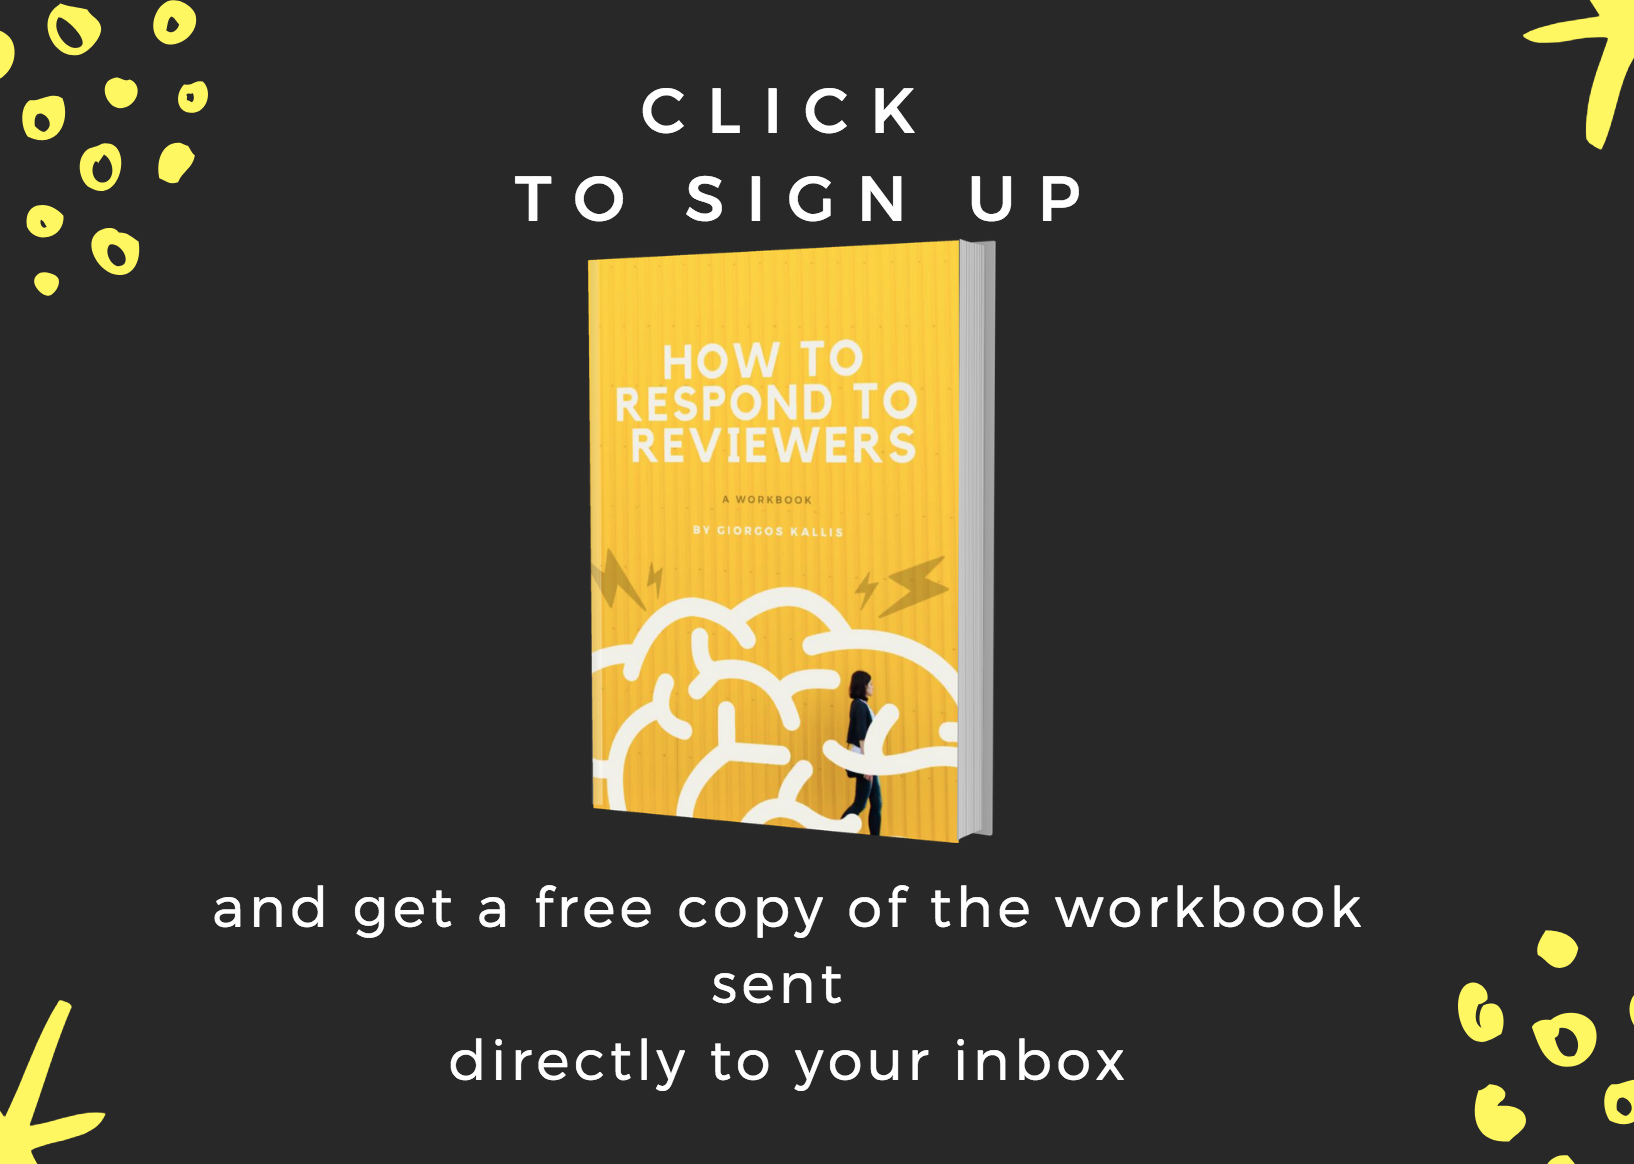 respond to reviewers workbook cover.